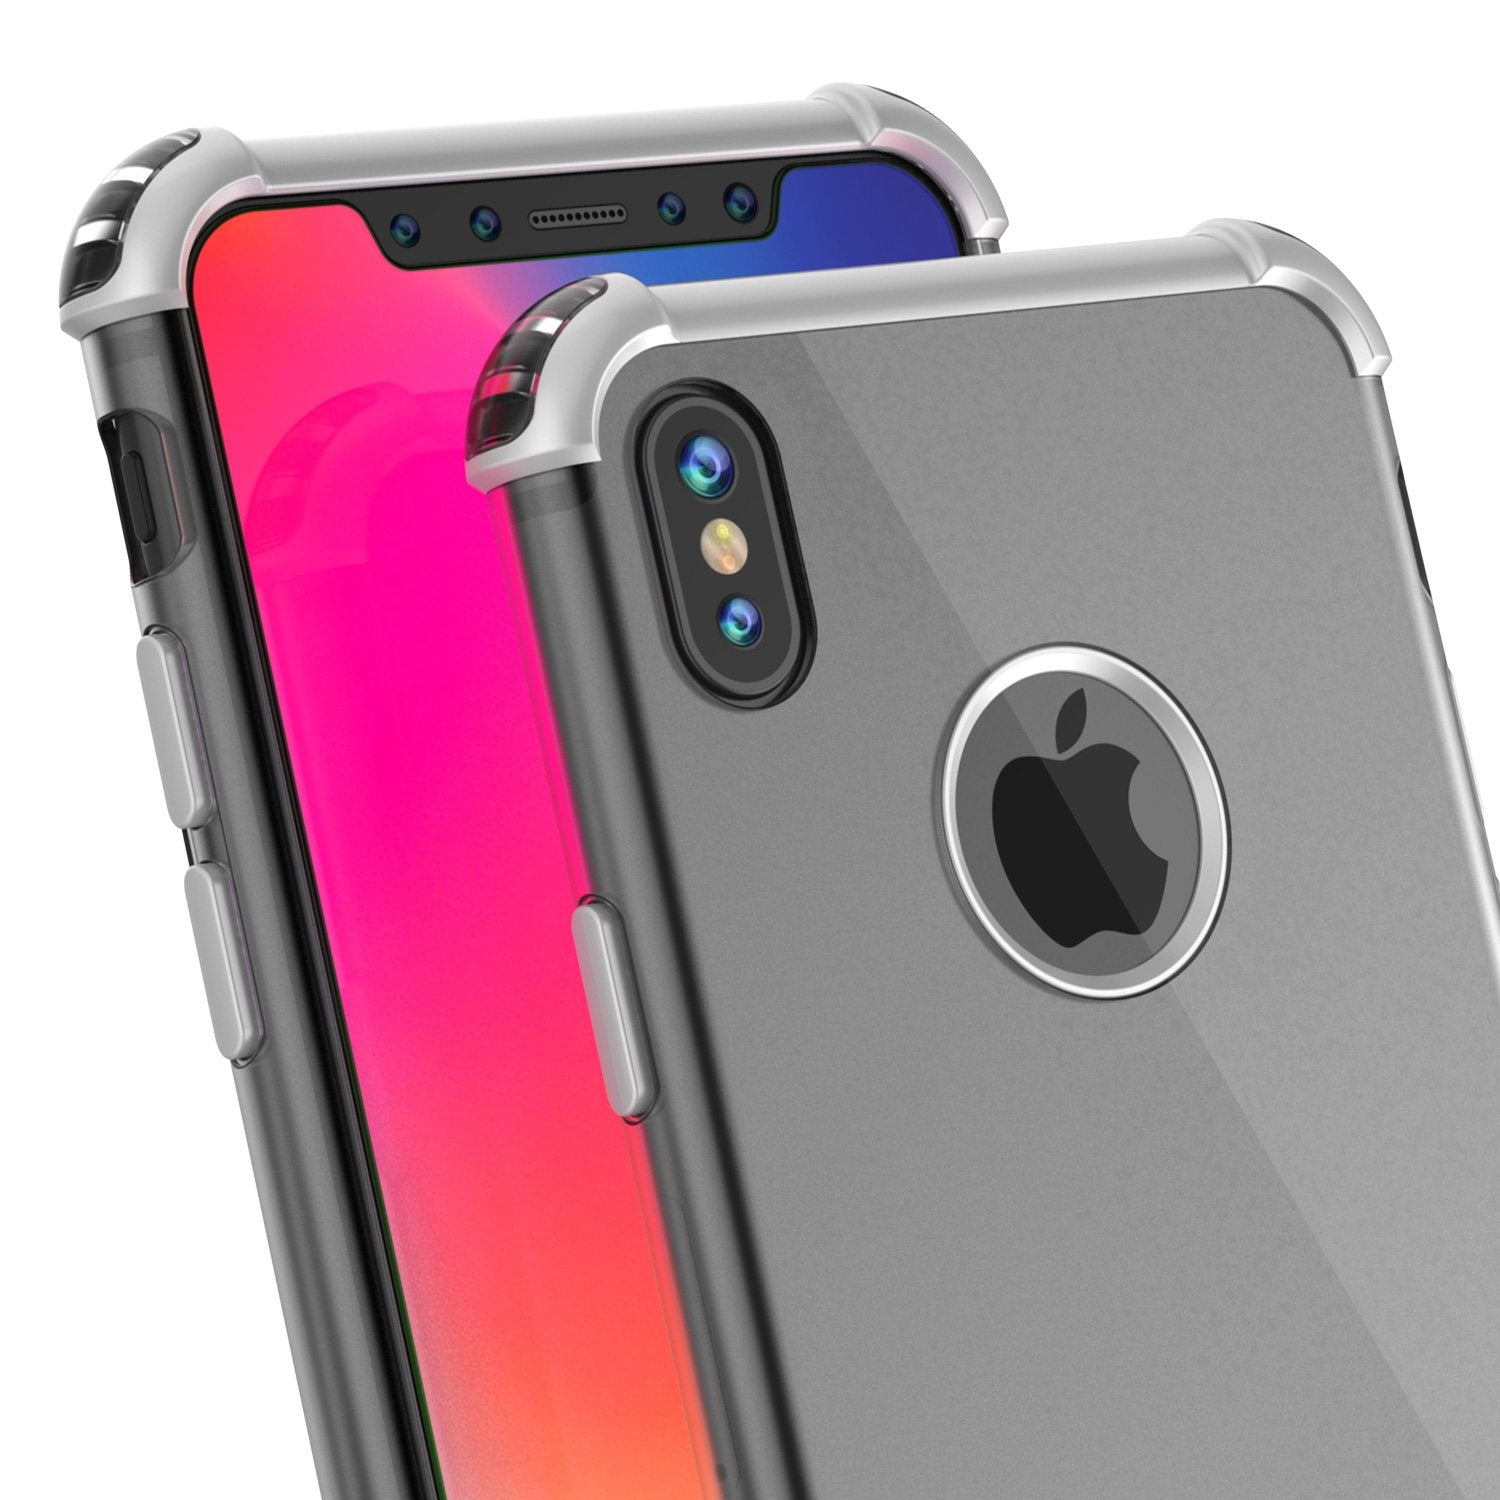 iPhone X Case, Punkcase BLAZE Silver Series Protective Cover W/ PunkShield Screen Protector